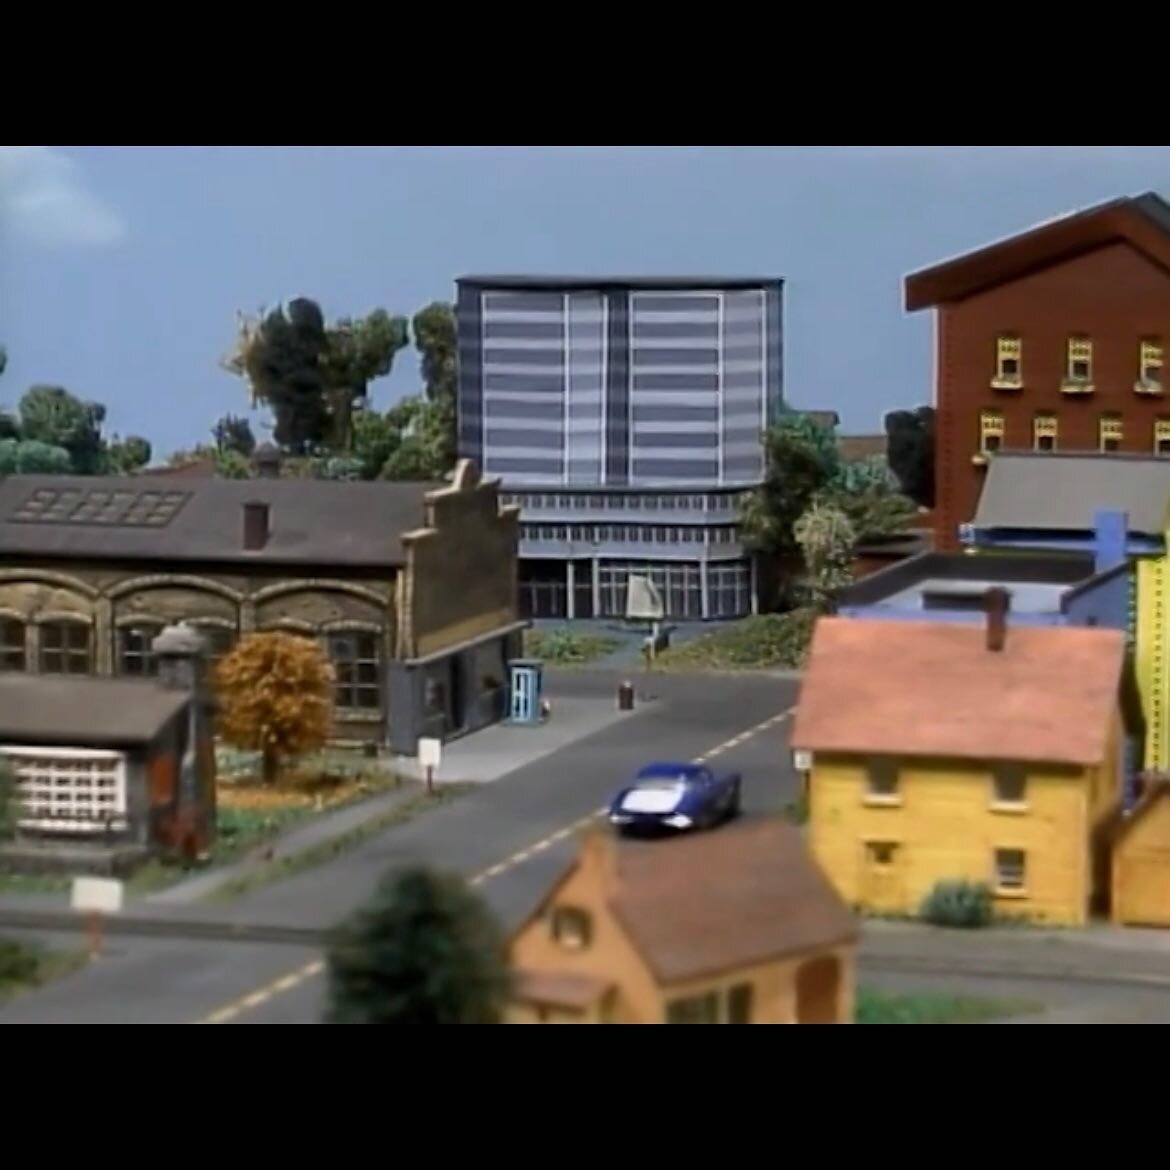 A beautiful day in the neighborhood. Mister Rogers Episode 1656 &ldquo;Up &amp; Down&rdquo; aired in 1992 and featured a visit to One Oxford Centre (and an adorable model interpretation dropped into the block) to ride the elevator &amp; escalator. De